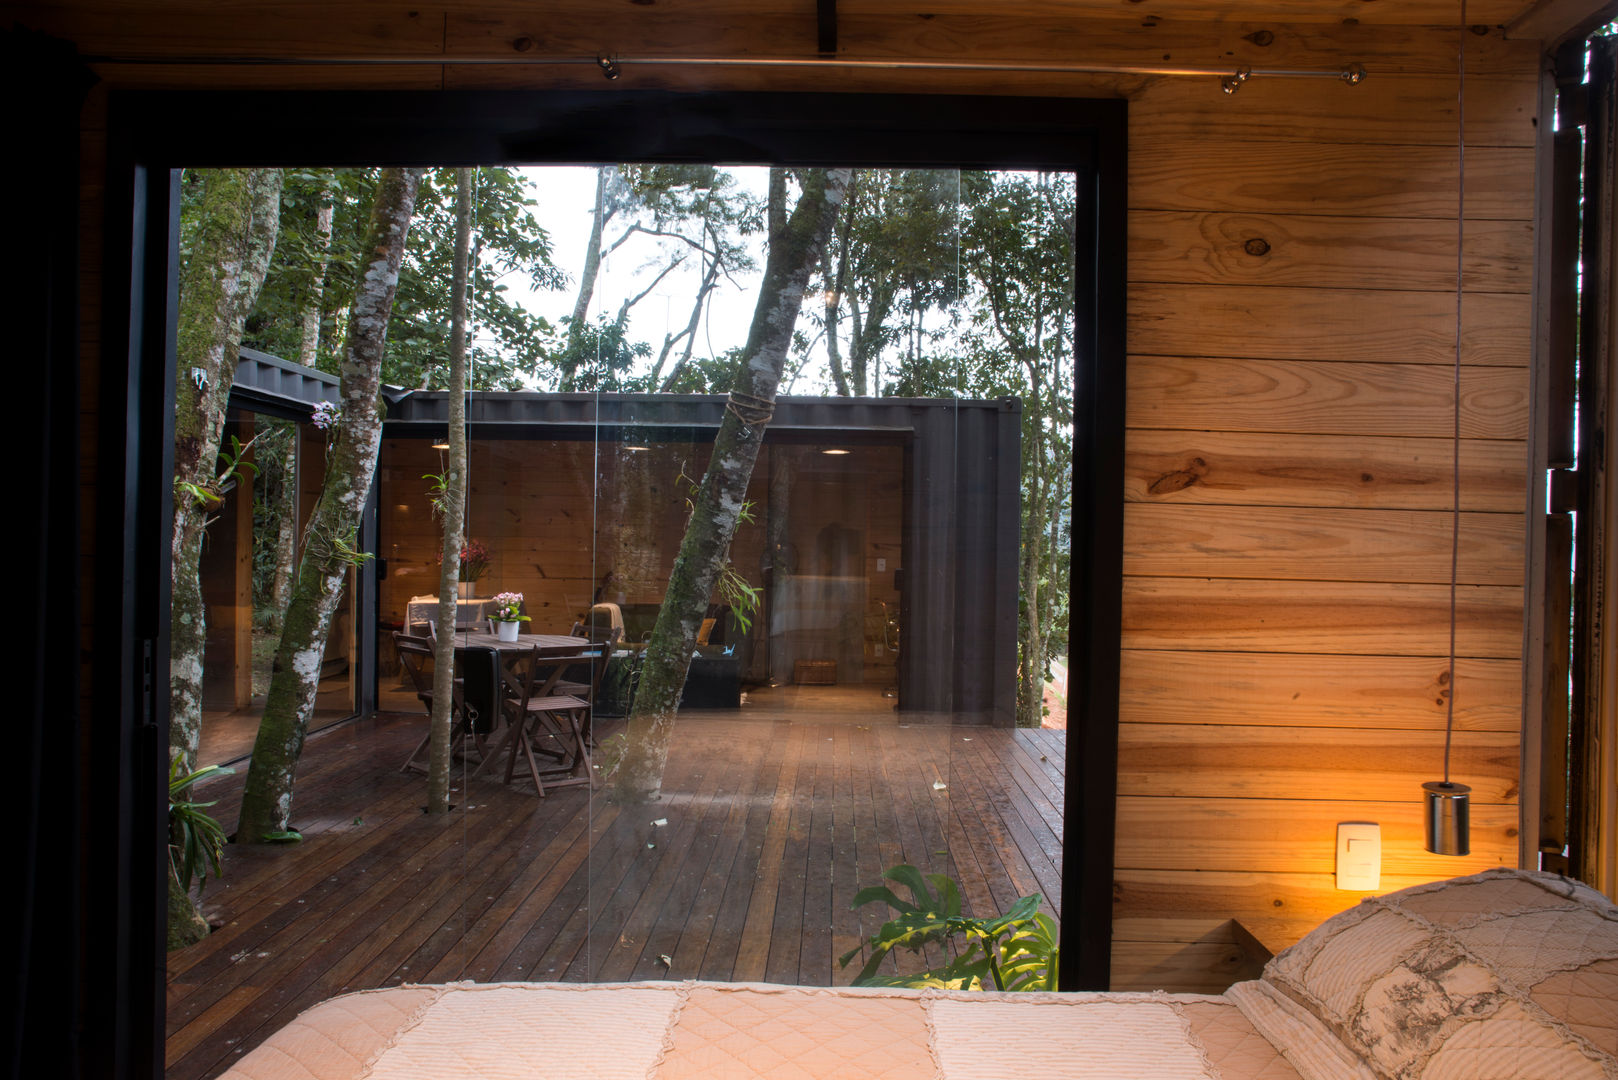 Casa Container, Giselle Wanderley arquitetura Giselle Wanderley arquitetura ห้องนอน